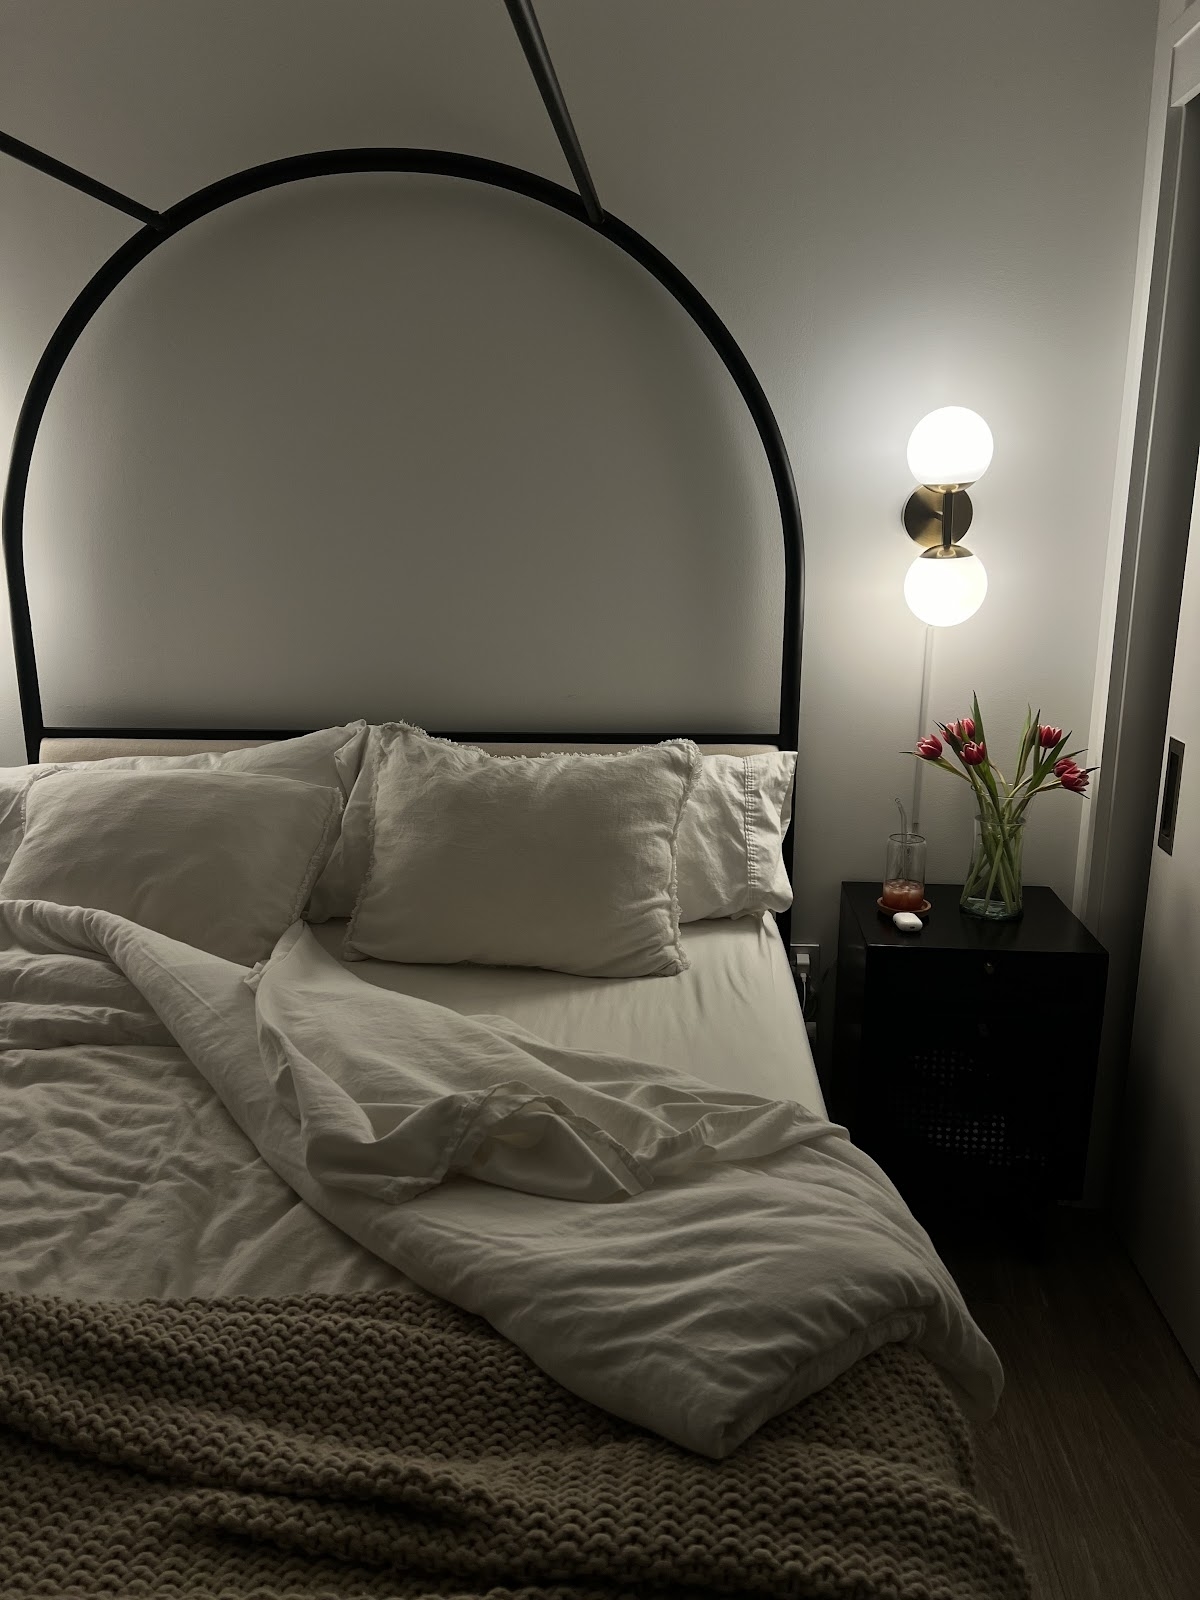 A dimly lit bedroom with an unmade bed, a nightstand with a lamp, and a vase of tulips